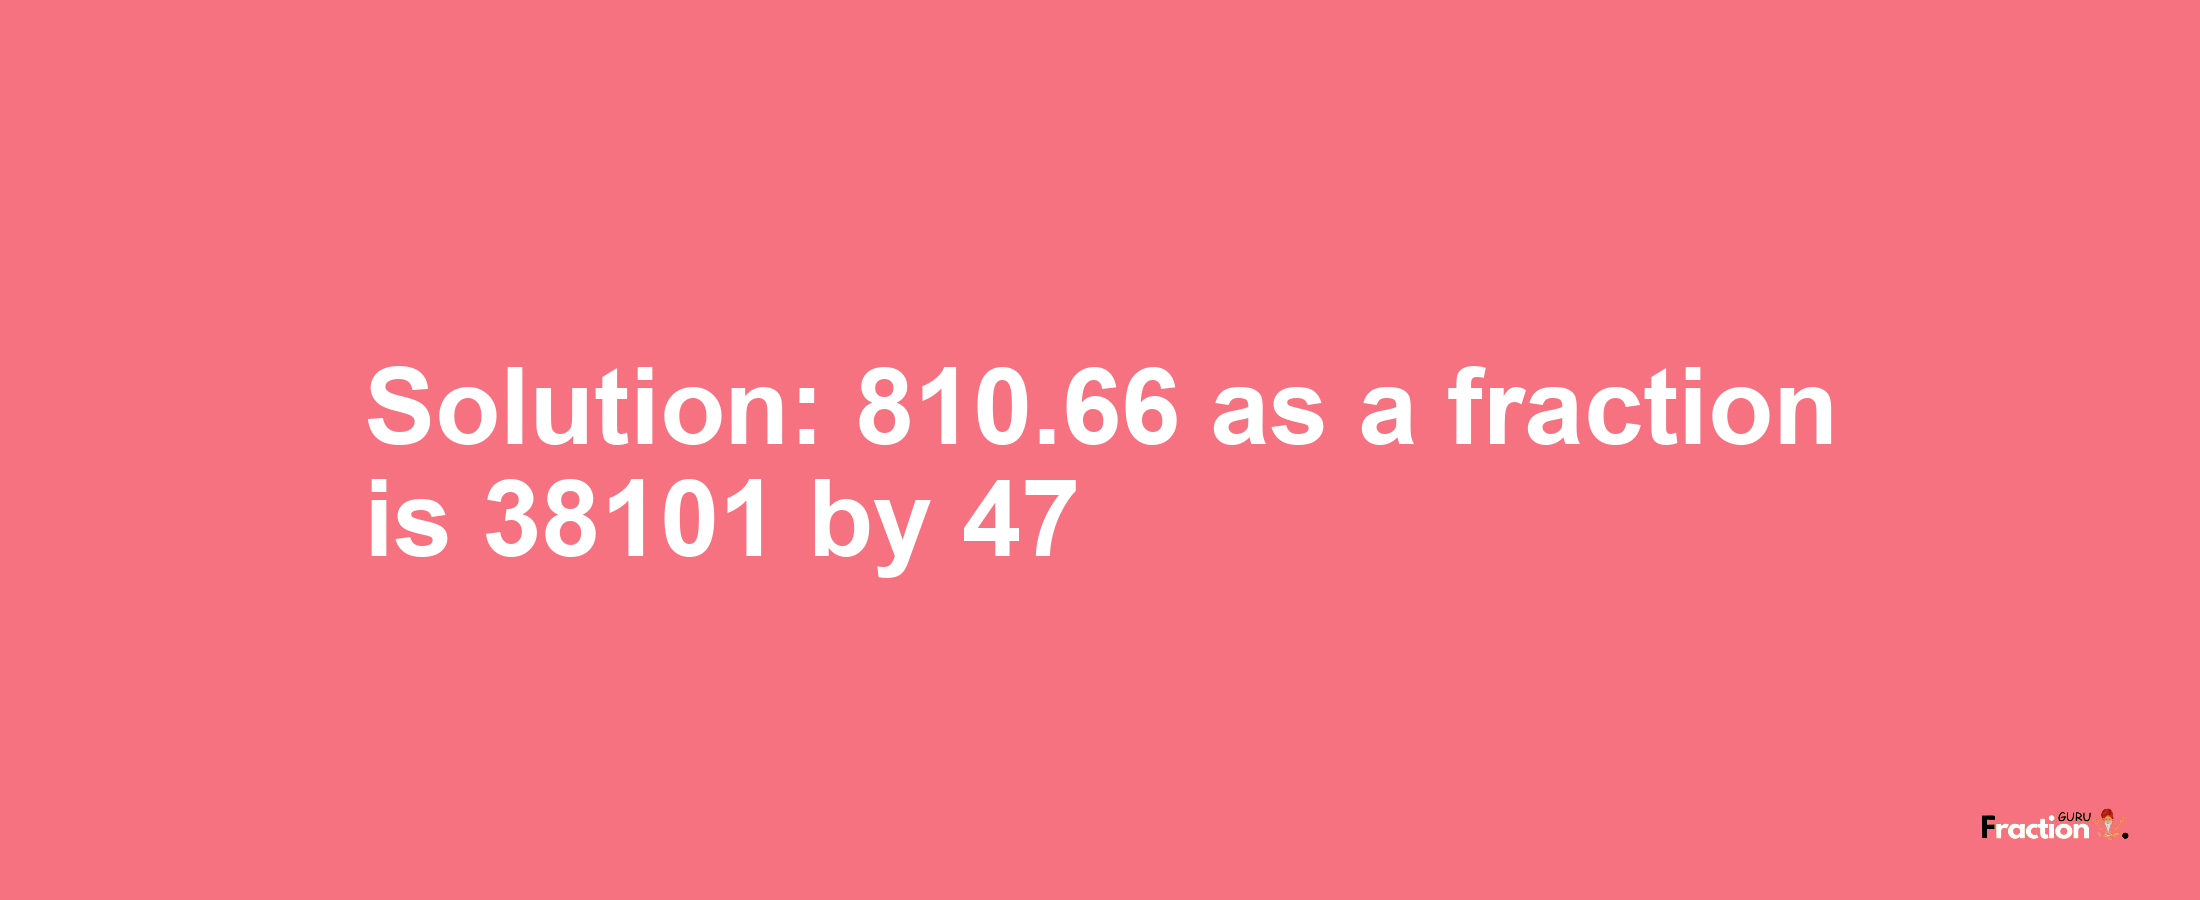 Solution:810.66 as a fraction is 38101/47